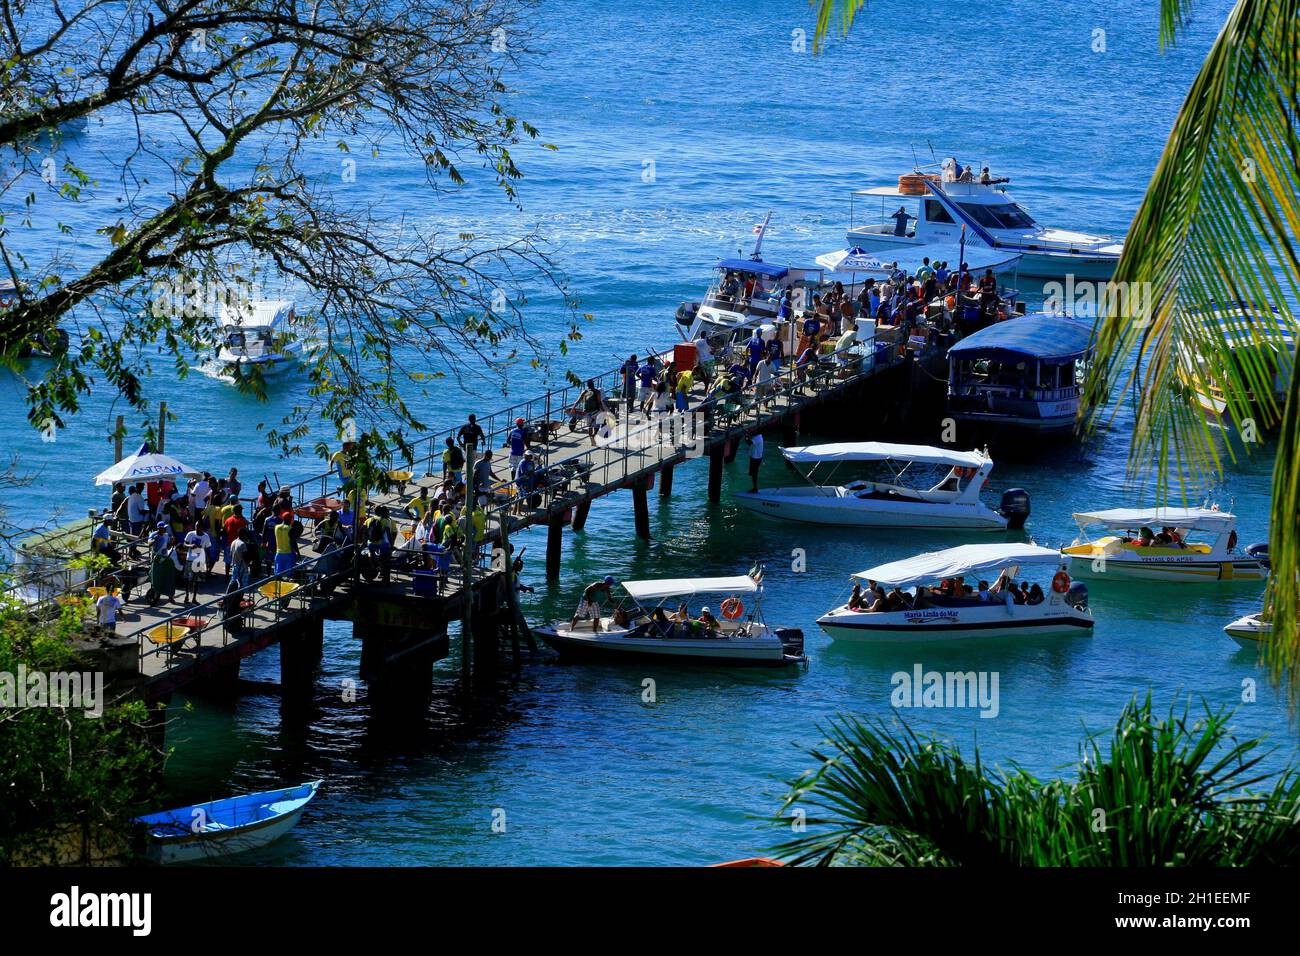 cairu, bahia / brazil - november 14, 2013: tourists are seen during embarkation and disembarkation at the port of the island of Morro de Sao Paulo, in Stock Photo